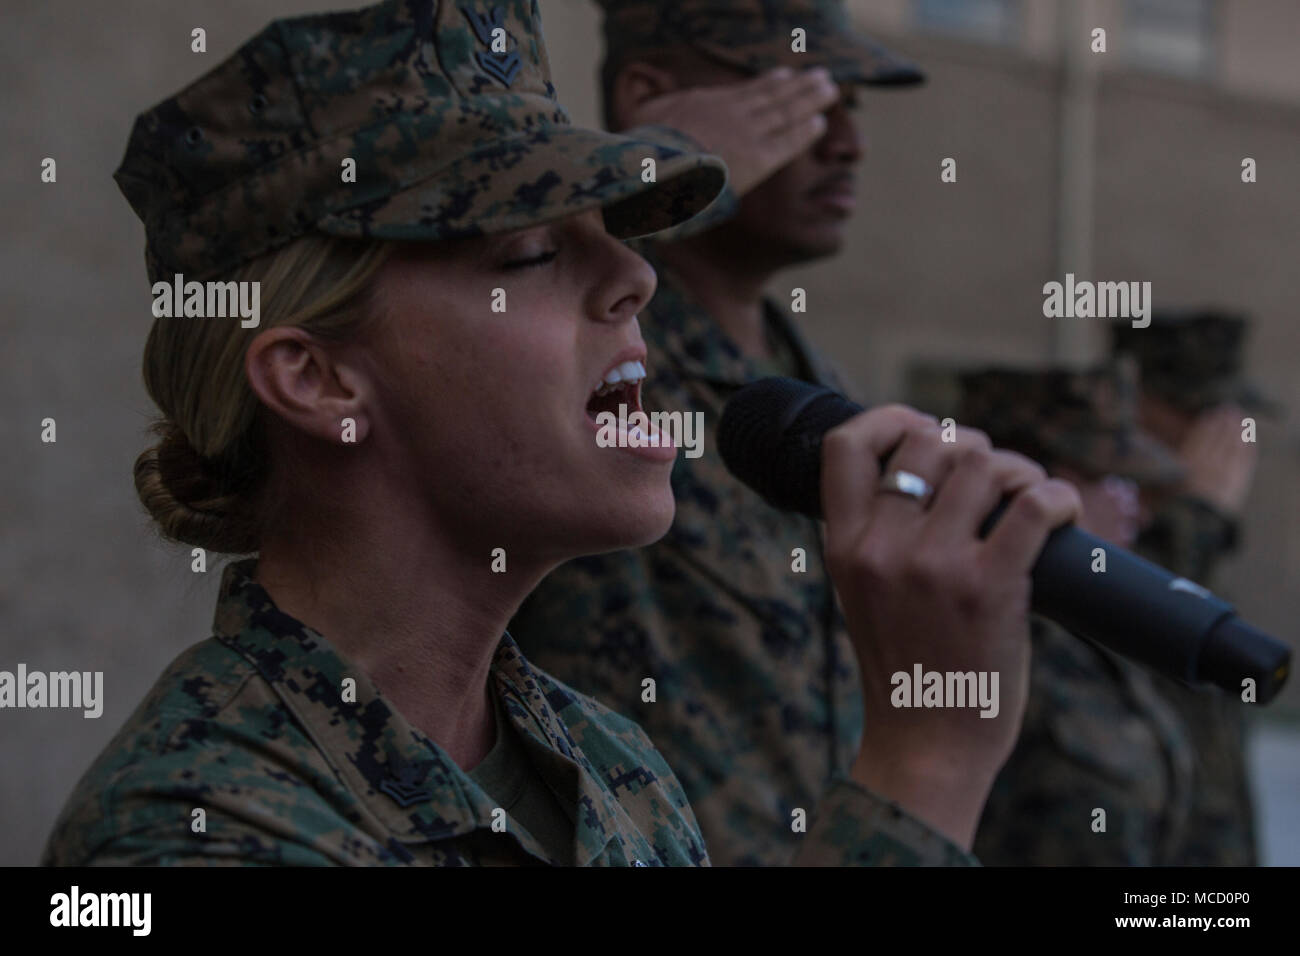 U.S. Navy Petty Officer 2nd Class Ashley Raynor, a hospital corpsman with 1st Marine Logistics Group, sings the National Anthem during the appointment ceremony for Master Chief Petty Officer Zachary Pryor, who will become the command master chief for the 1st MLG, at Camp Pendleton, Calif., Feb. 13, 2018. Pryor was appointed as the command master chief for all medical and dental personnel within the 1st MLG. (U.S. Marine Corps photo by Cpl. Adam Dublinske) Stock Photo